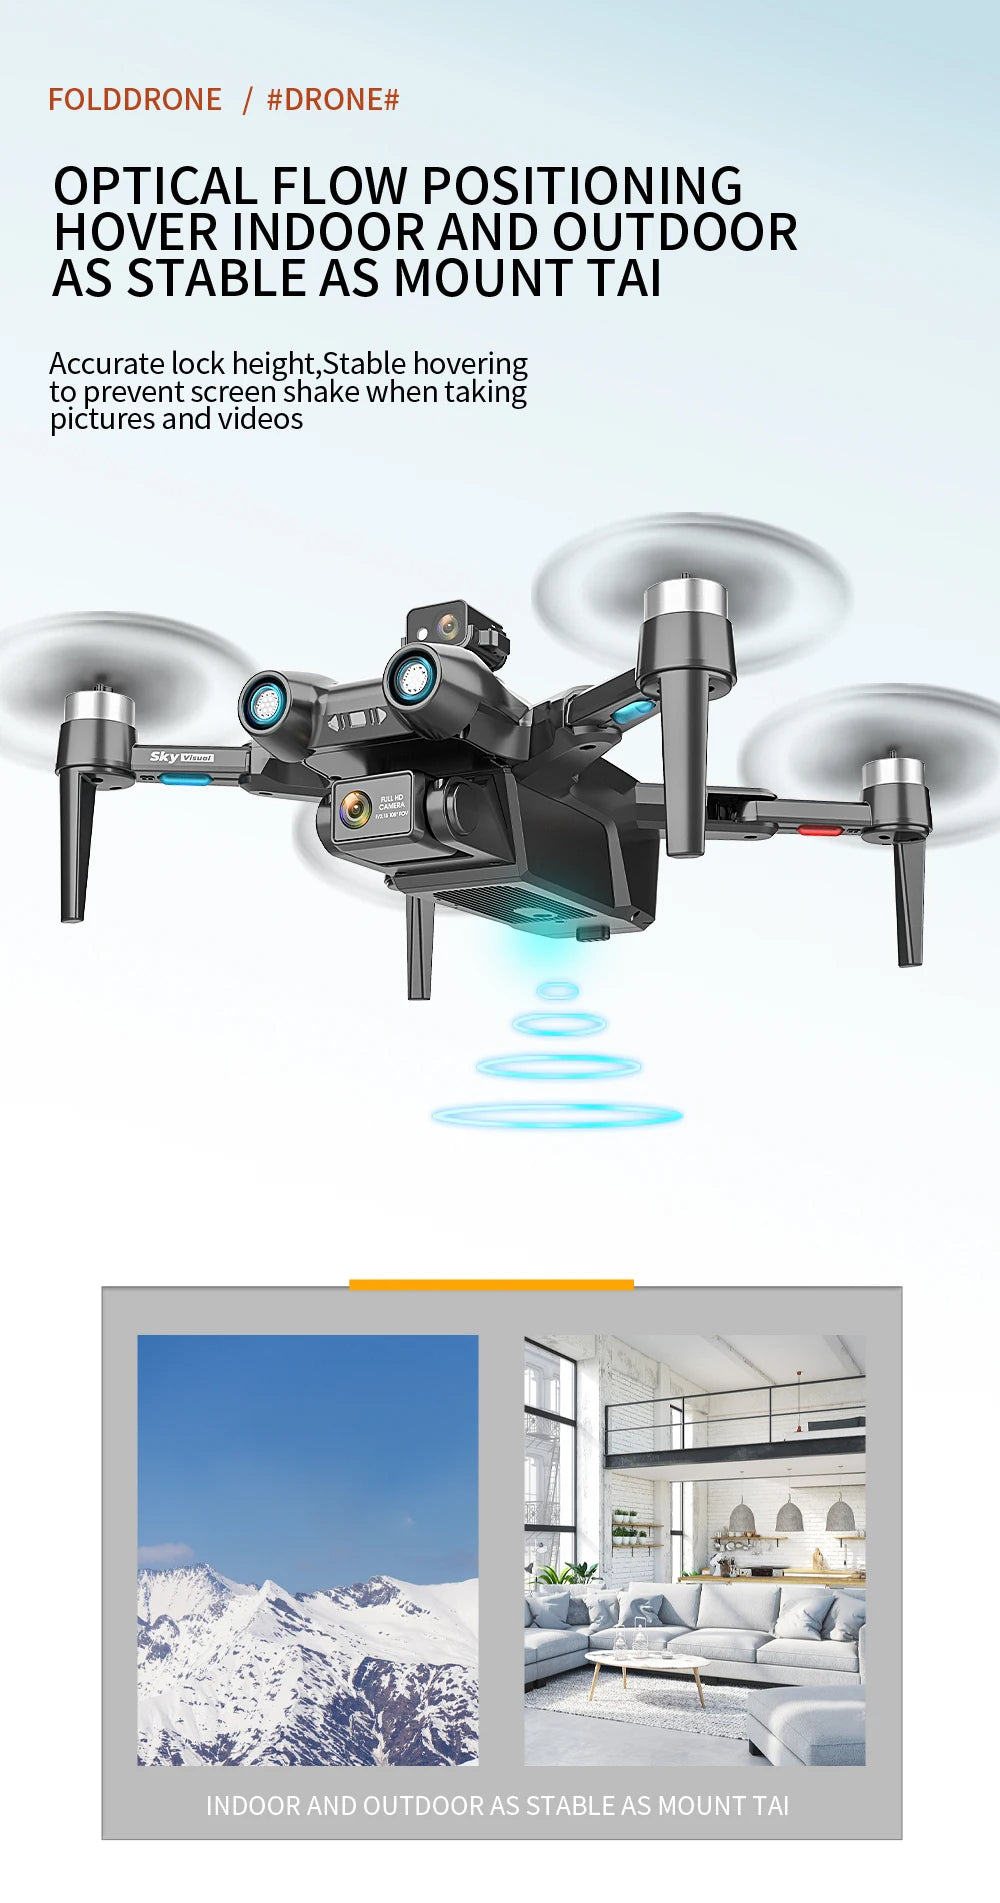 New AE6 / AE6 Max Drone, SkyMval aur 2 INDOOR AND OUTDOOR AS STABLEAS